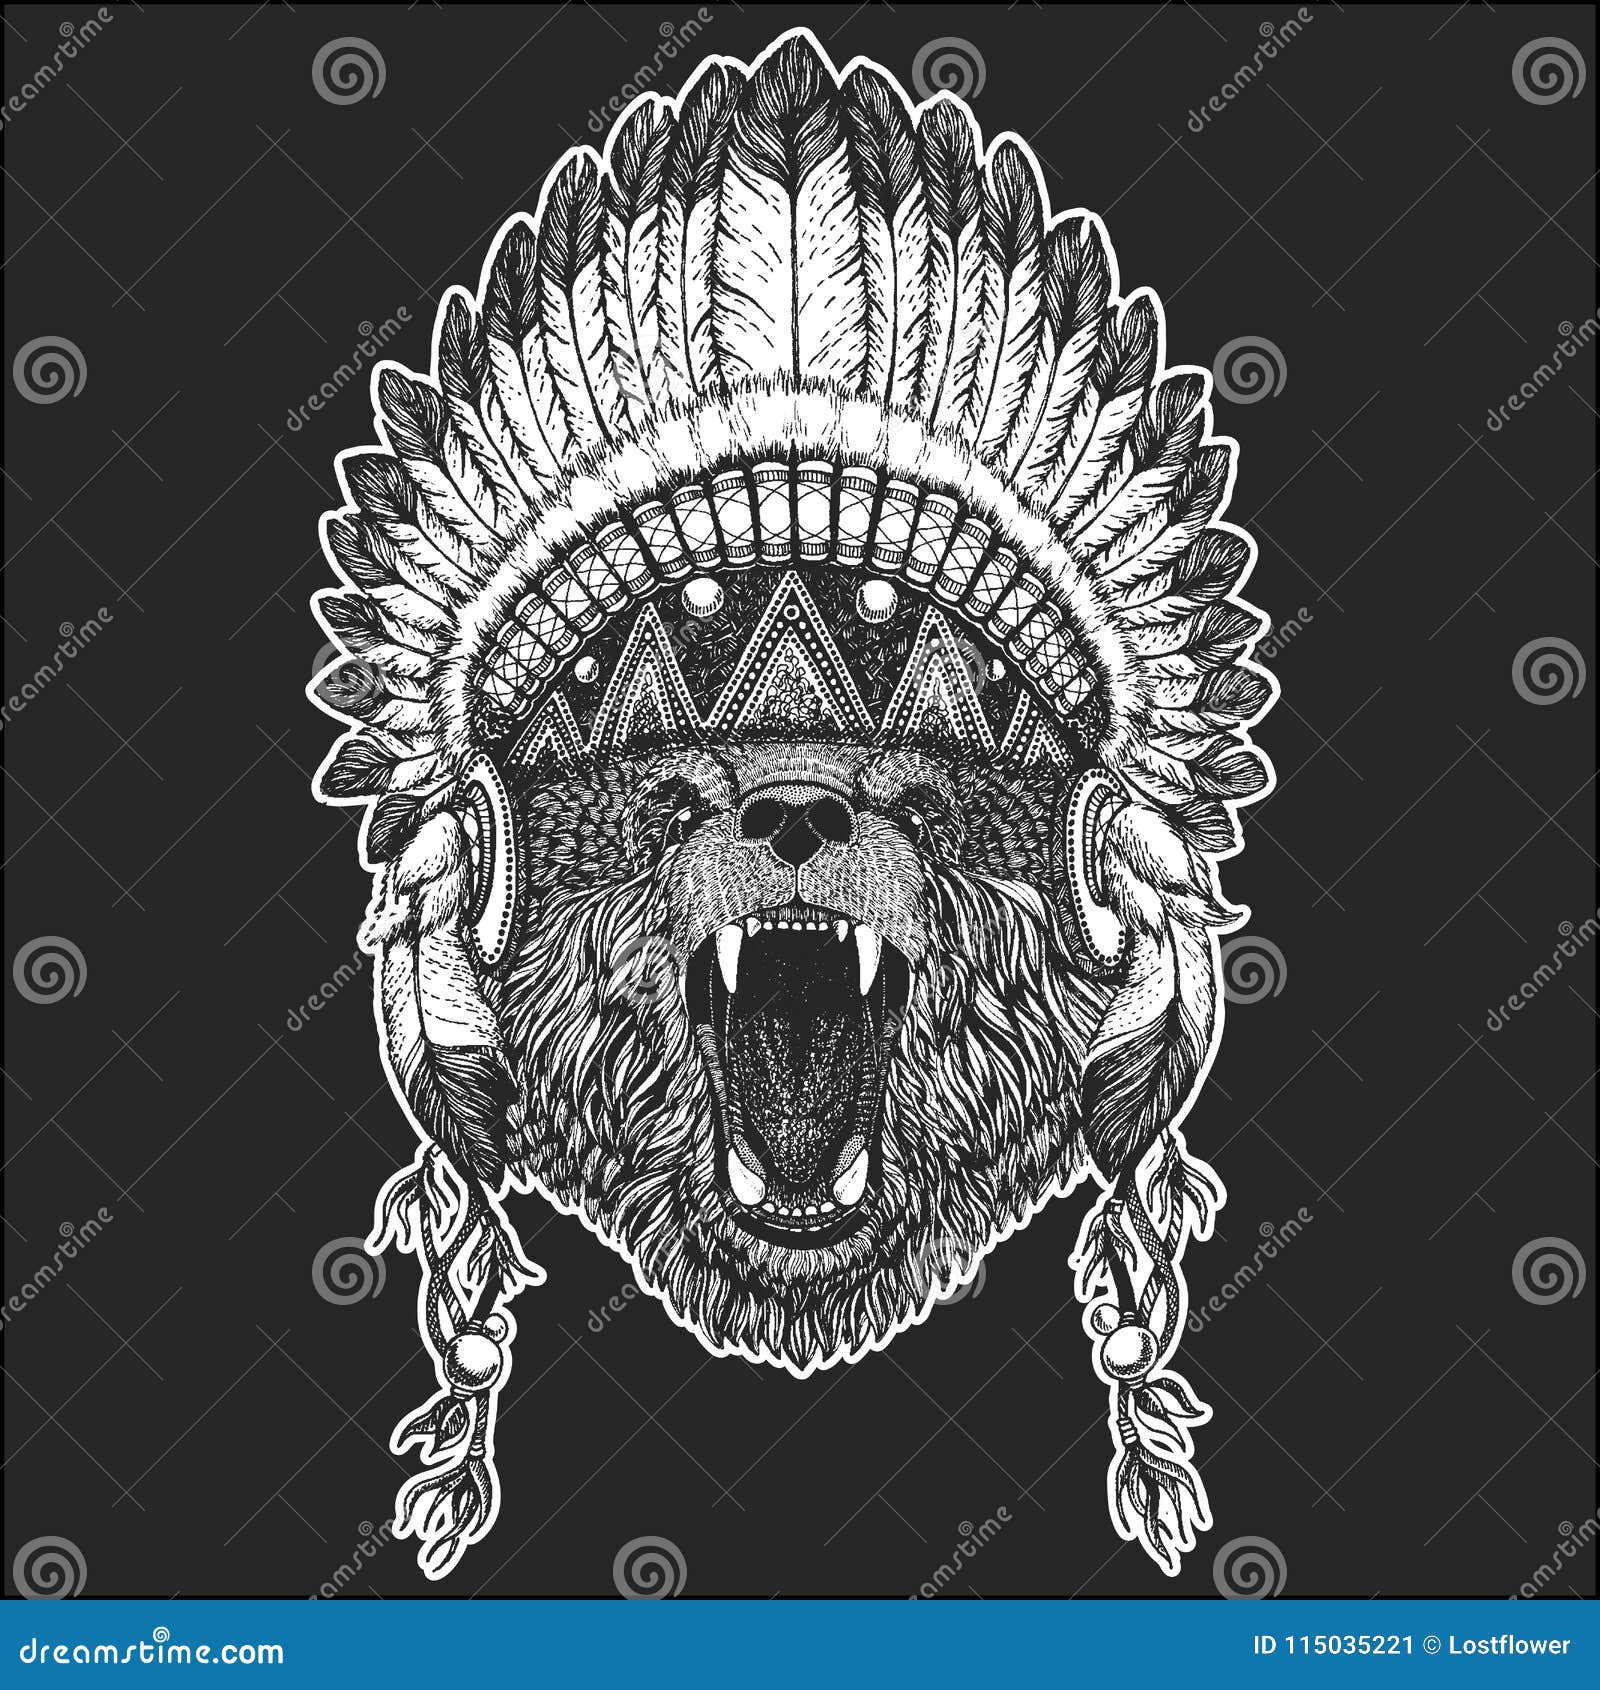 Bear Cool Animal Wearing Native American Indian Headdress With Feathers Boho Chic Style Hand Drawn Image For Tattoo Stock Vector Illustration Of Dress Engraving 115035221